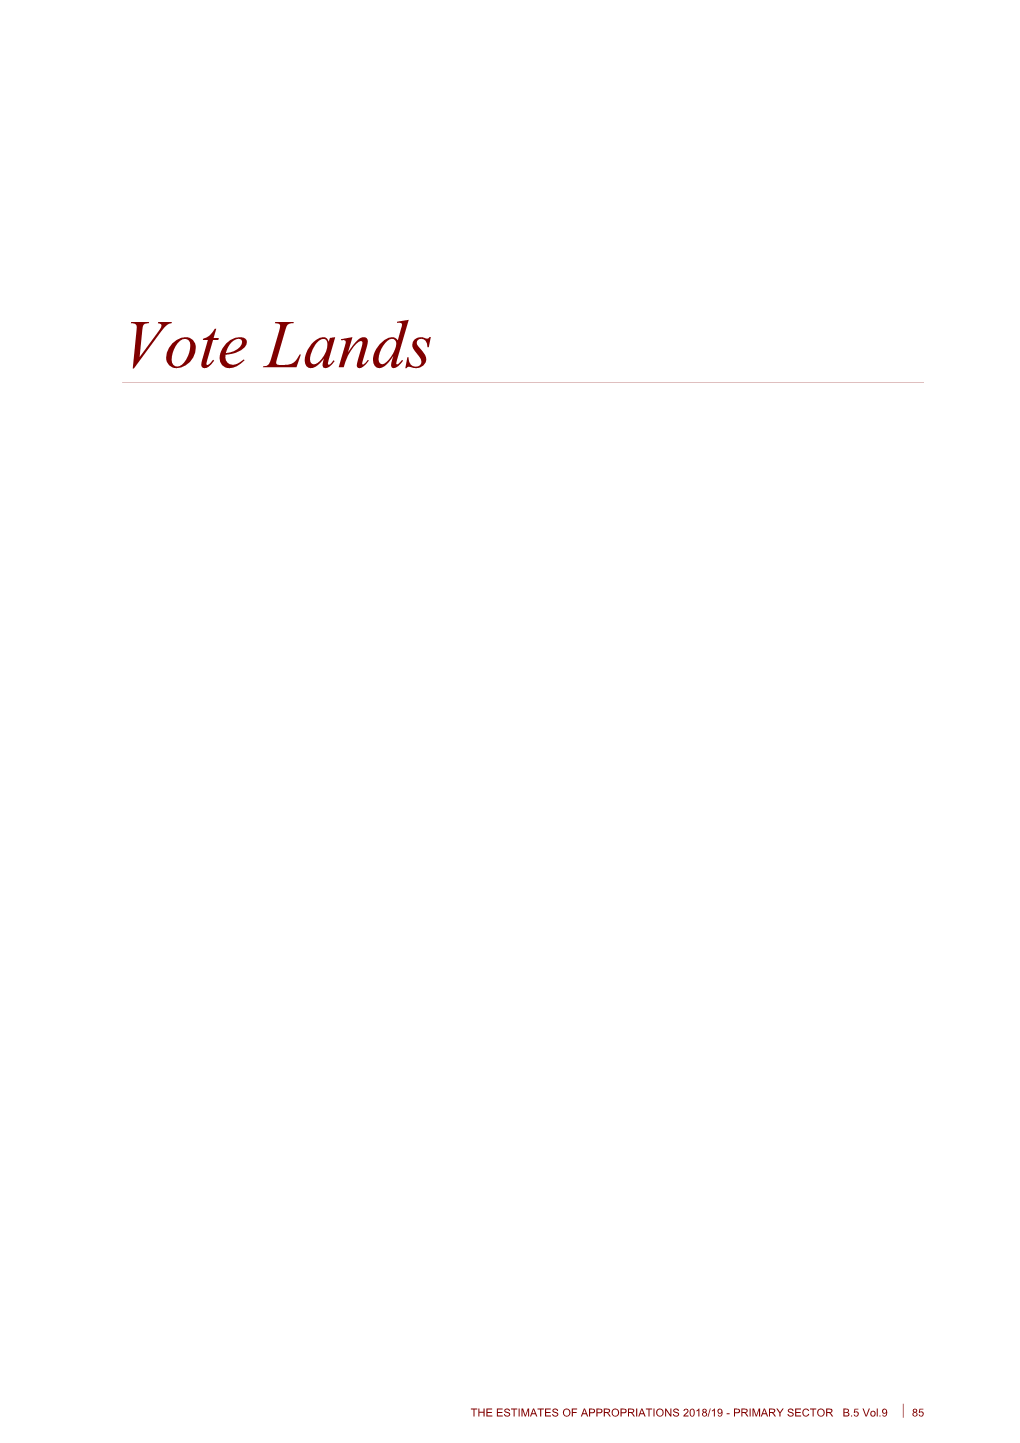 Vote Lands - Vol 9 Primary Sector - the Estimates of Appropriations 2018/19 - Budget 2018